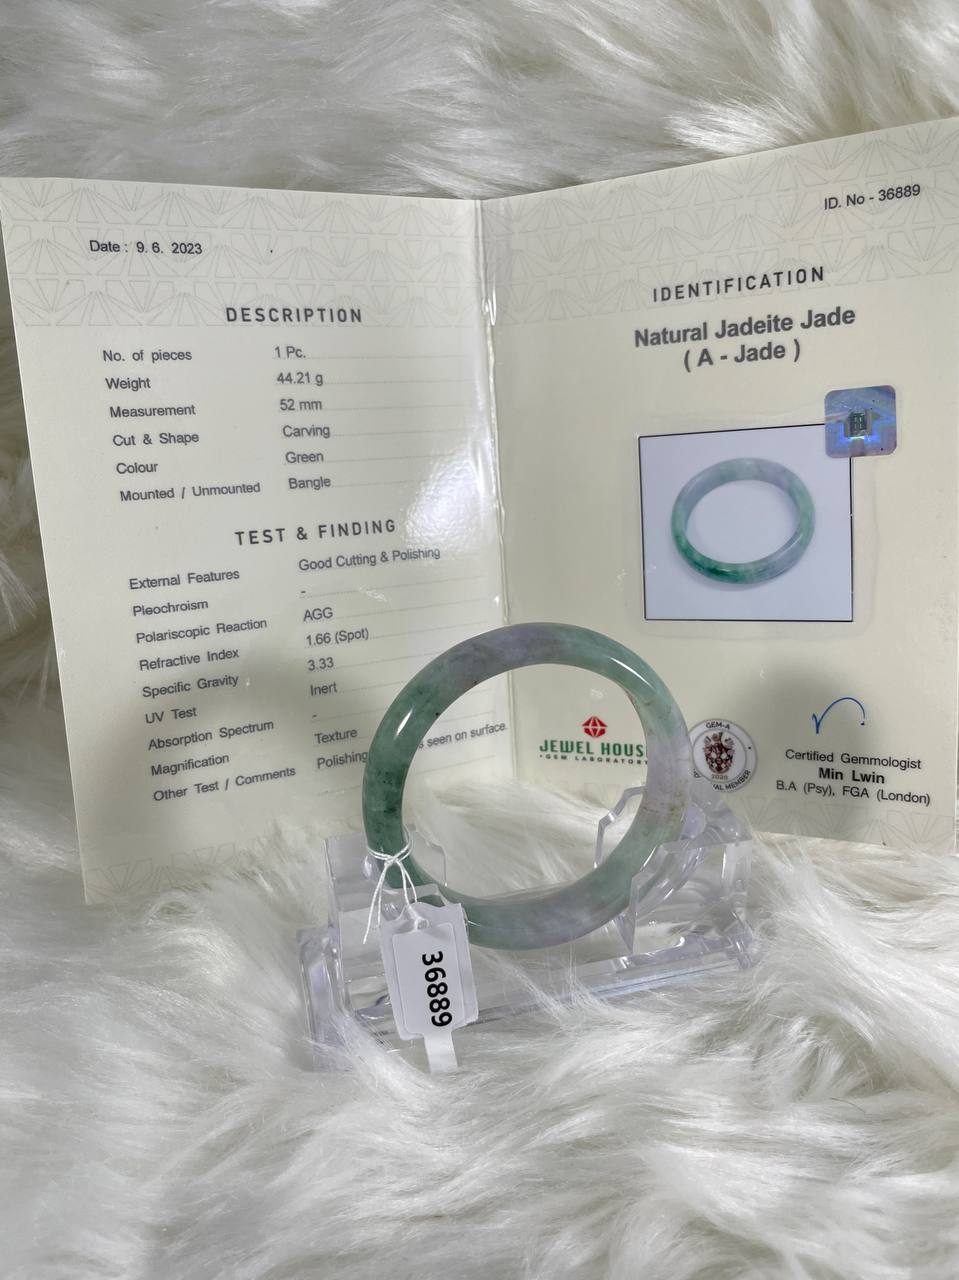 Grade A Natural Jade Bangle with certificate #36889